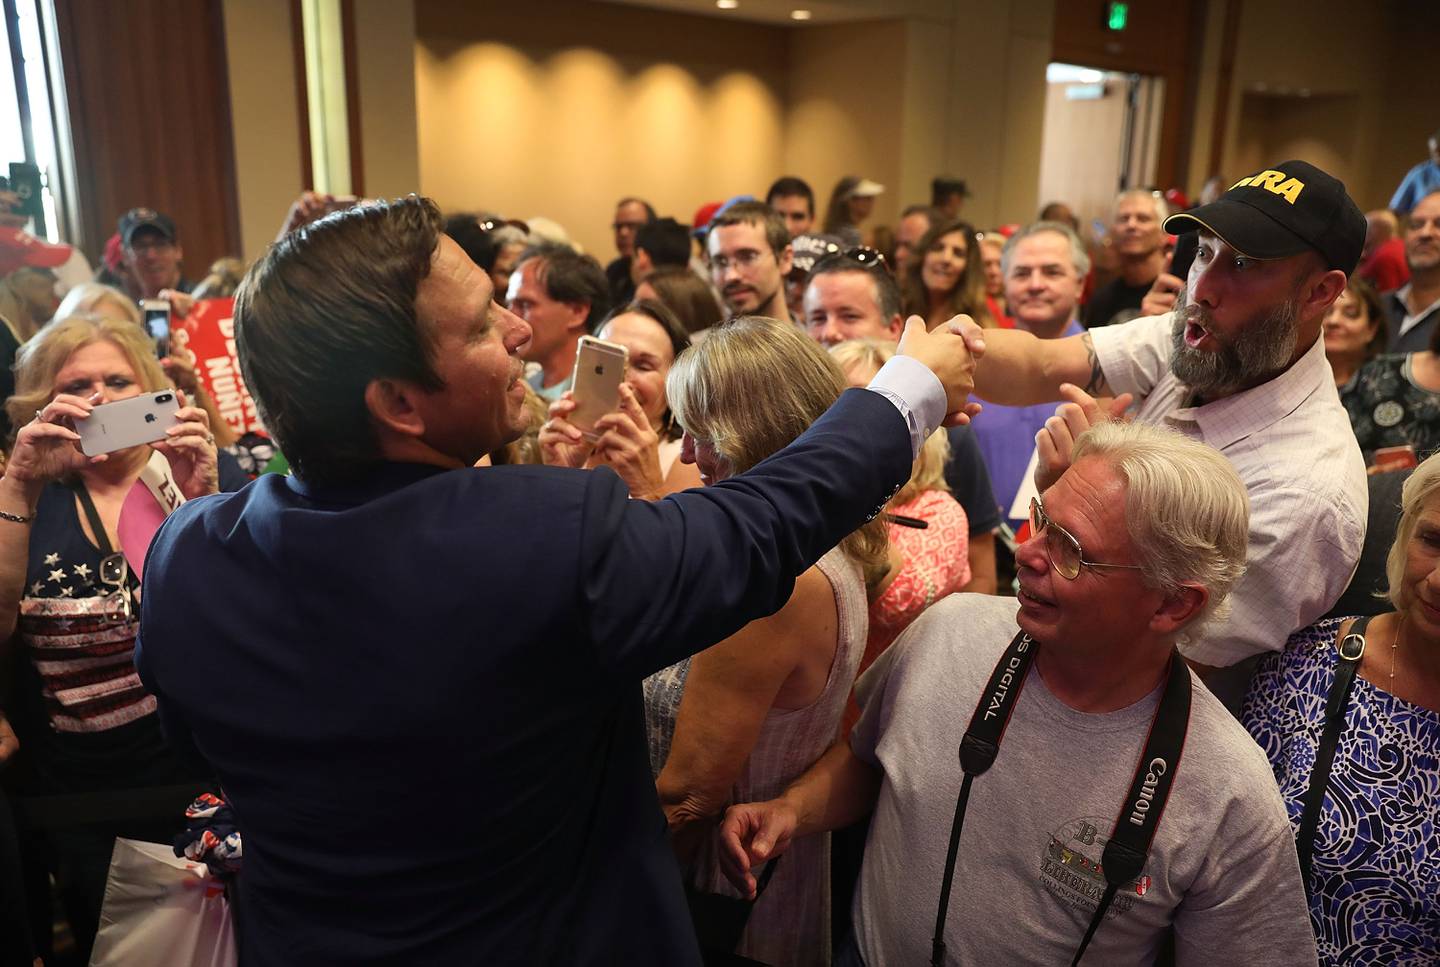 WEST PALM BEACH, FL - OCTOBER 06:  Republican gubernatorial candidate Ron DeSantis greets people as he holds a campaign rally at the Palm Beach County Convention Center on October 6, 2018 in West Palm Beach, Florida. DeSantis is facing off against Democratic challenger Andrew Gillum to be the next Florida governor.